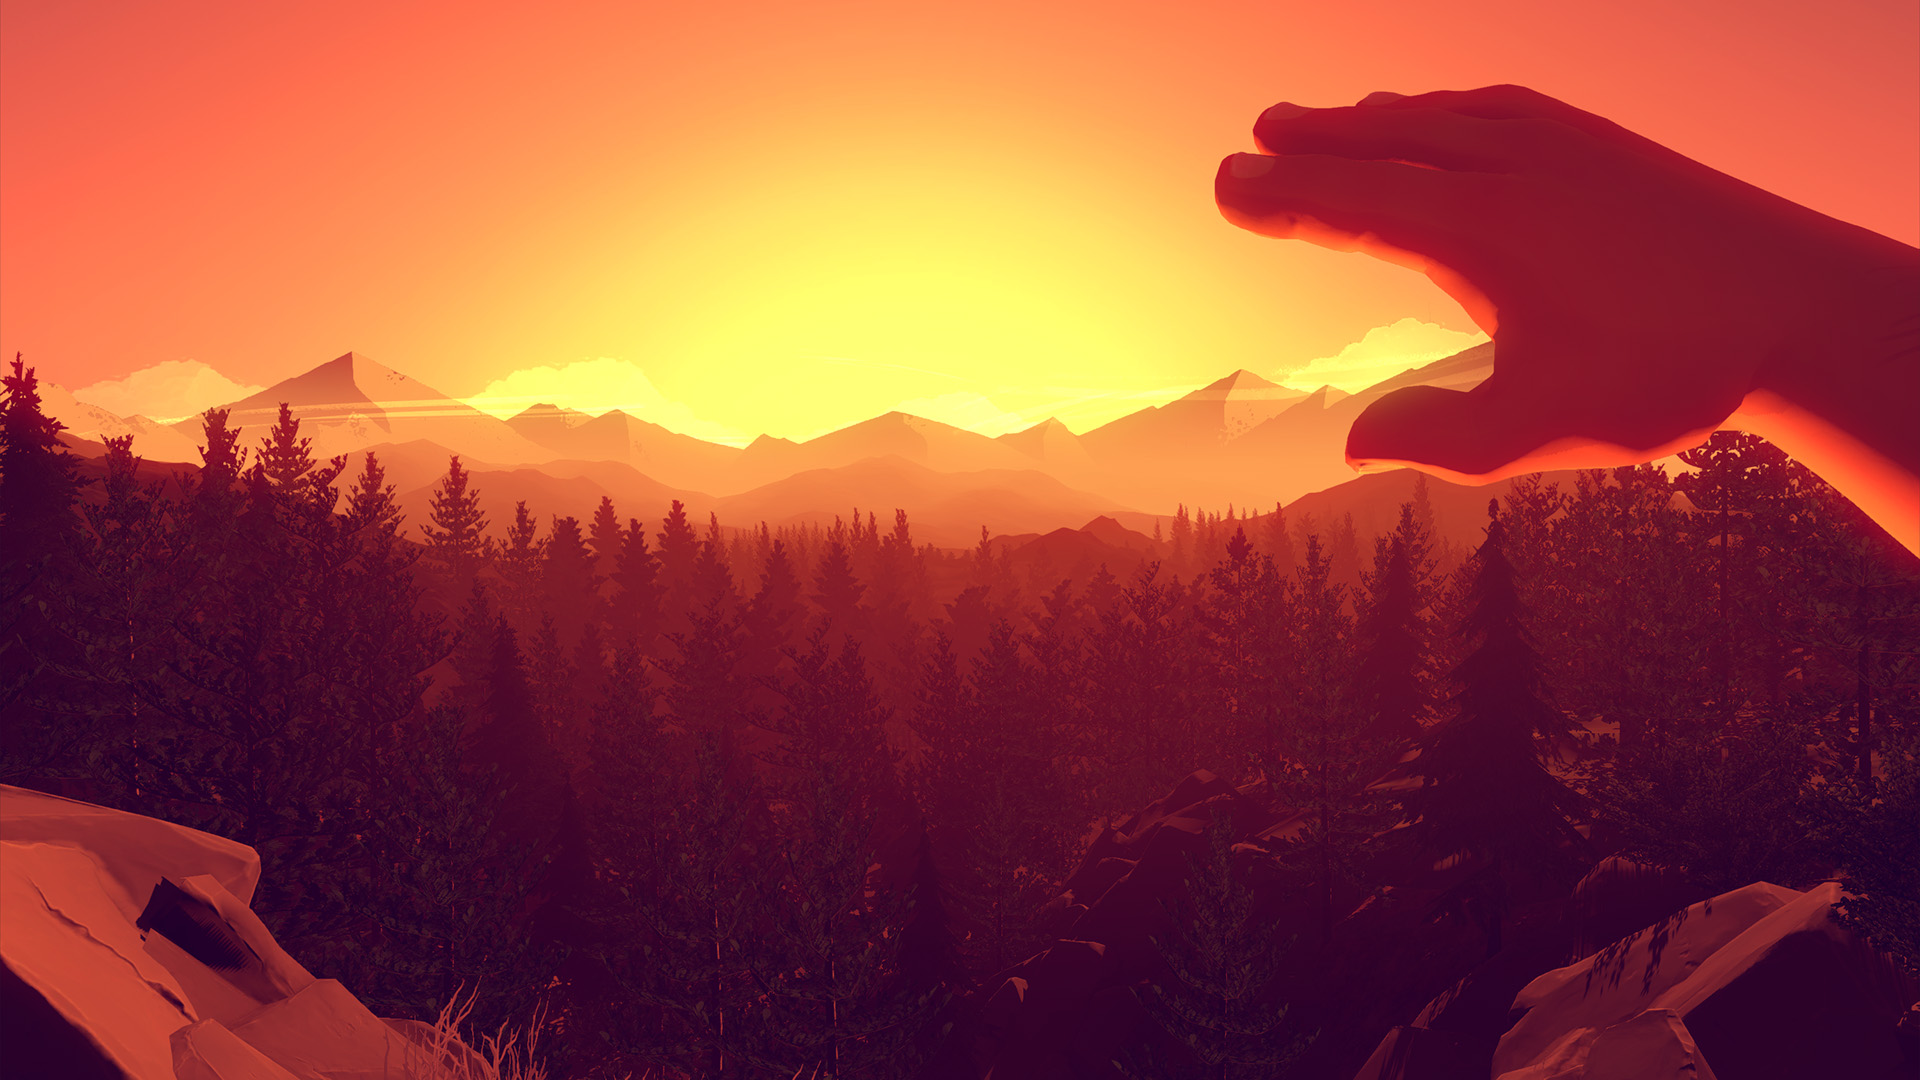 firewatch review screen 2.0 GeekFeed's Top 10 Games of 2016